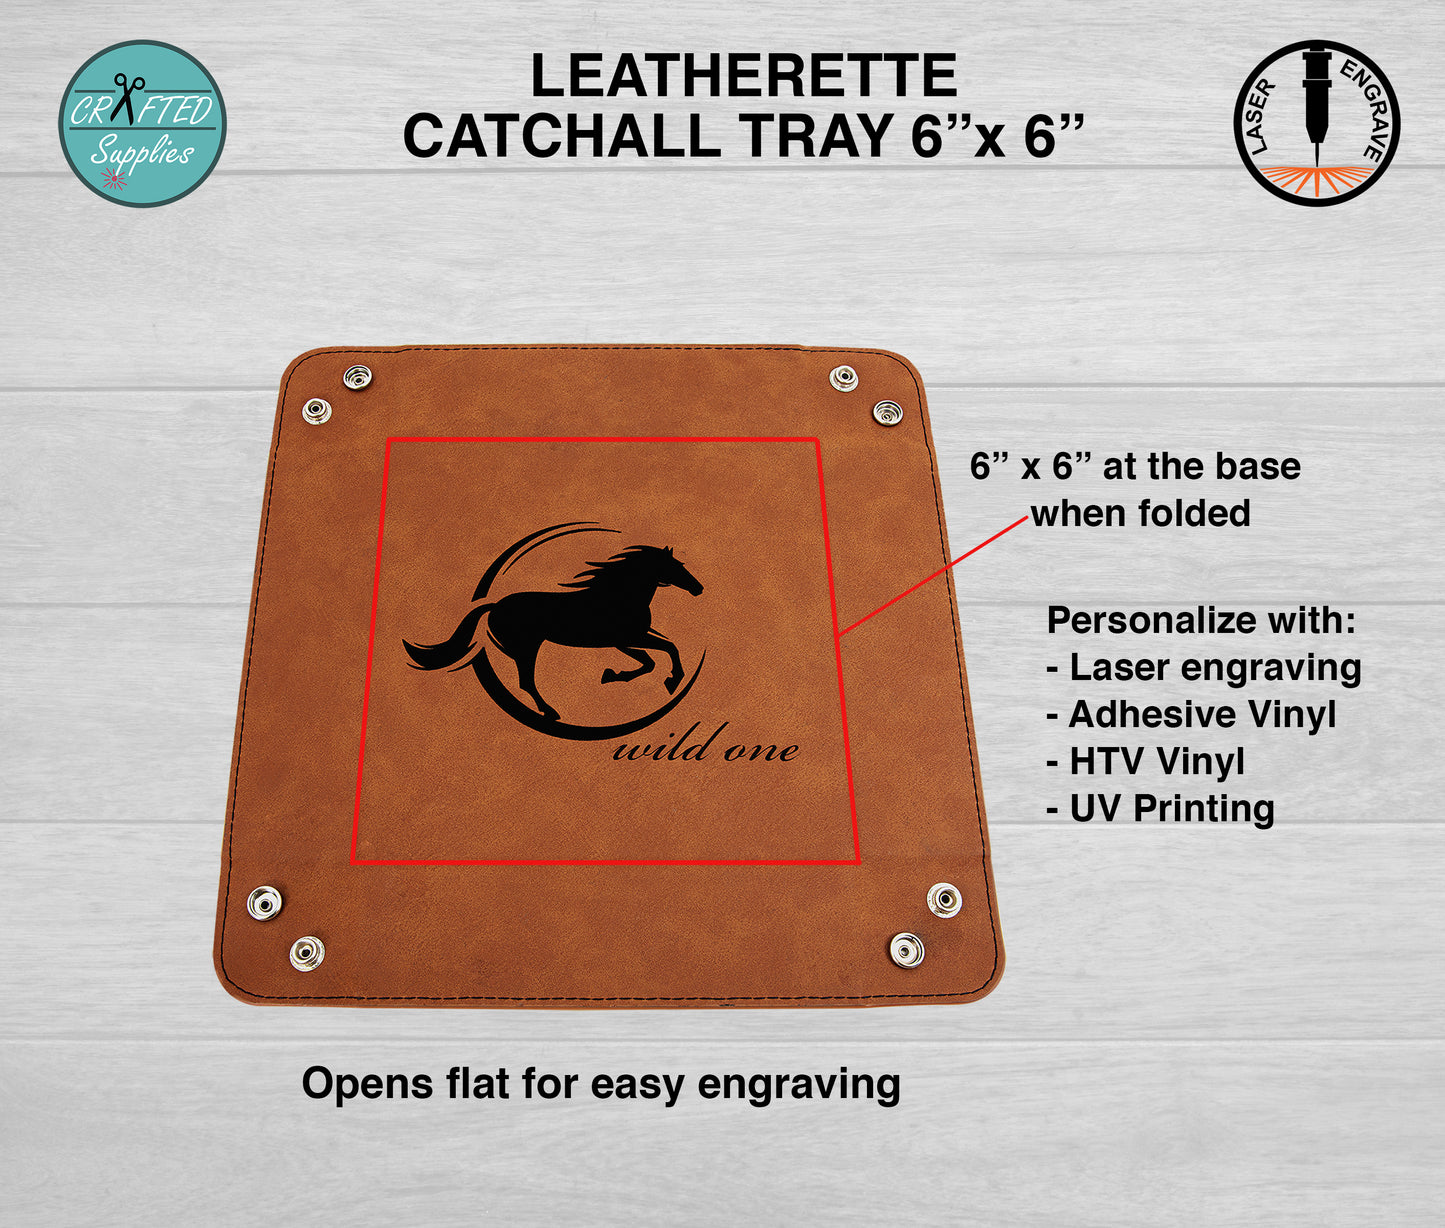 Leatherette Catchall tray, Valet Tray 6" x 6"